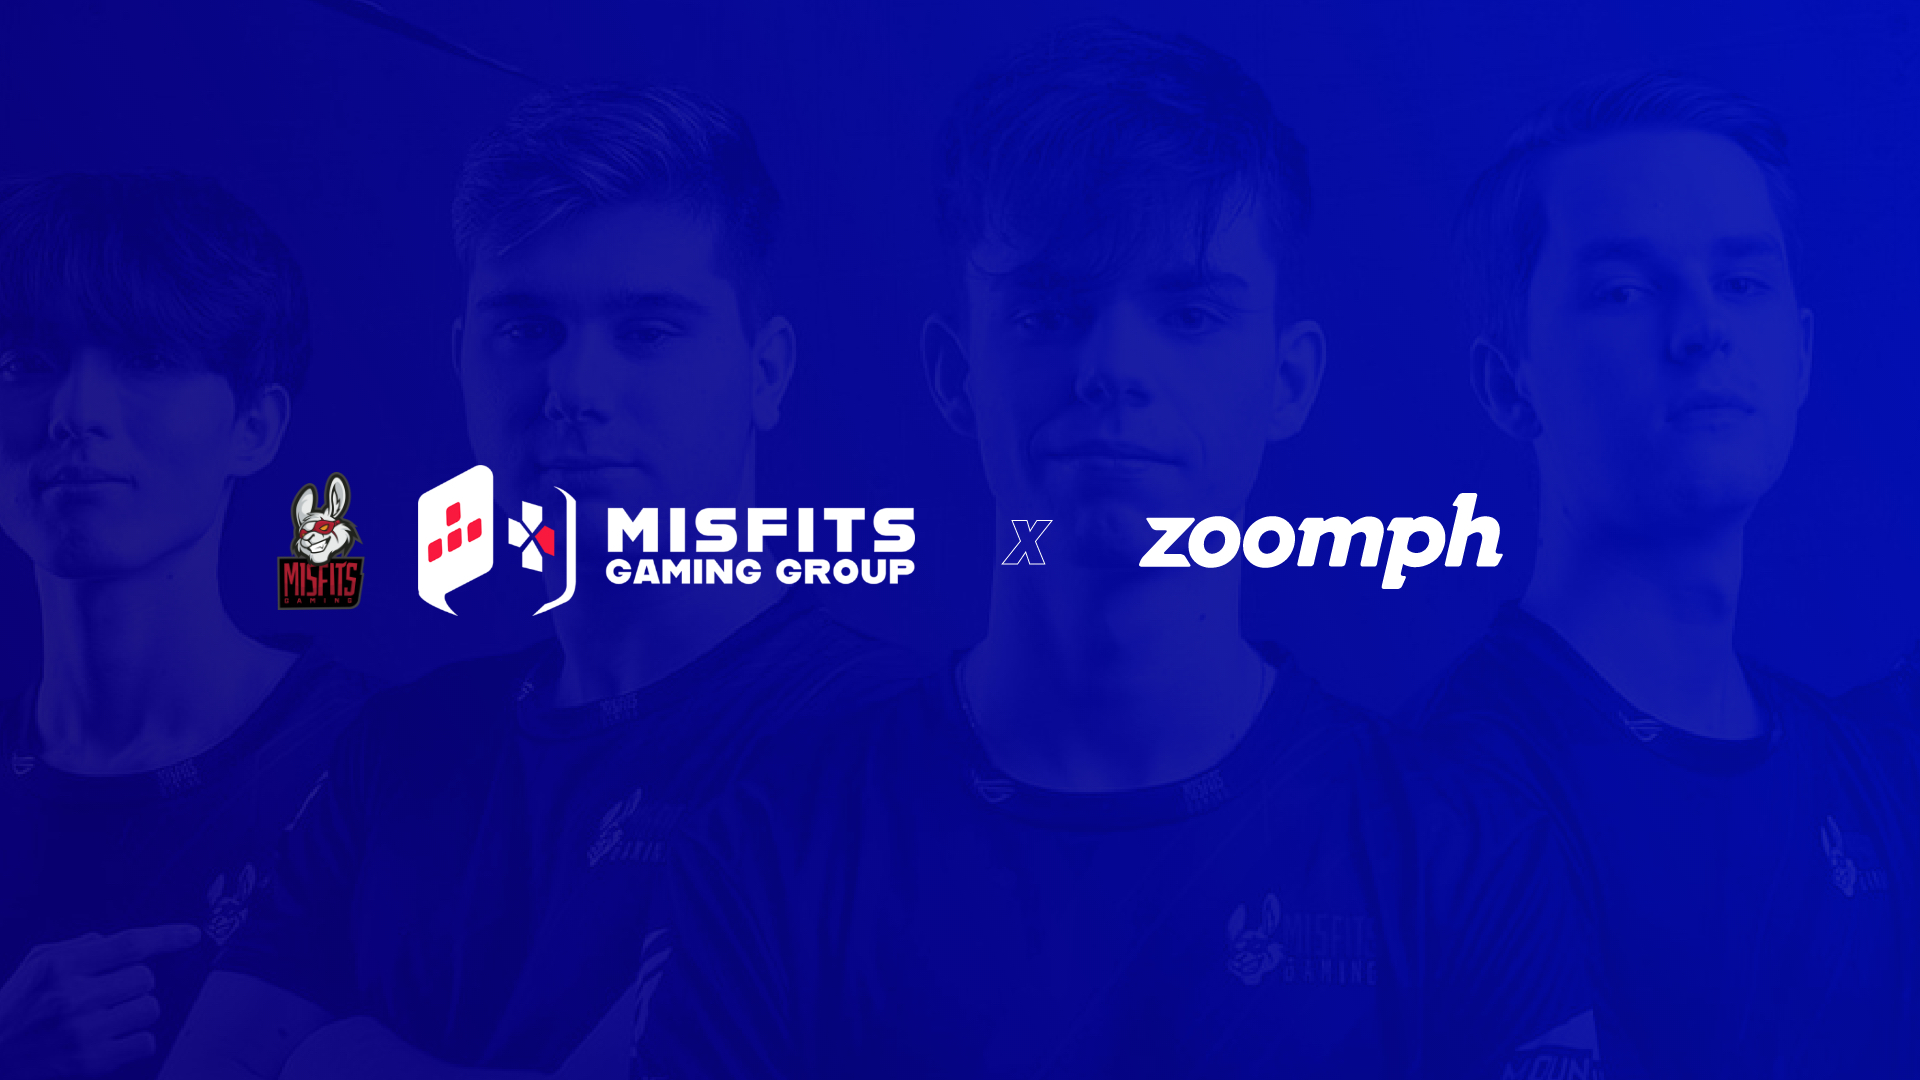 Misfits Gaming Group enters vital organization with Zoomph